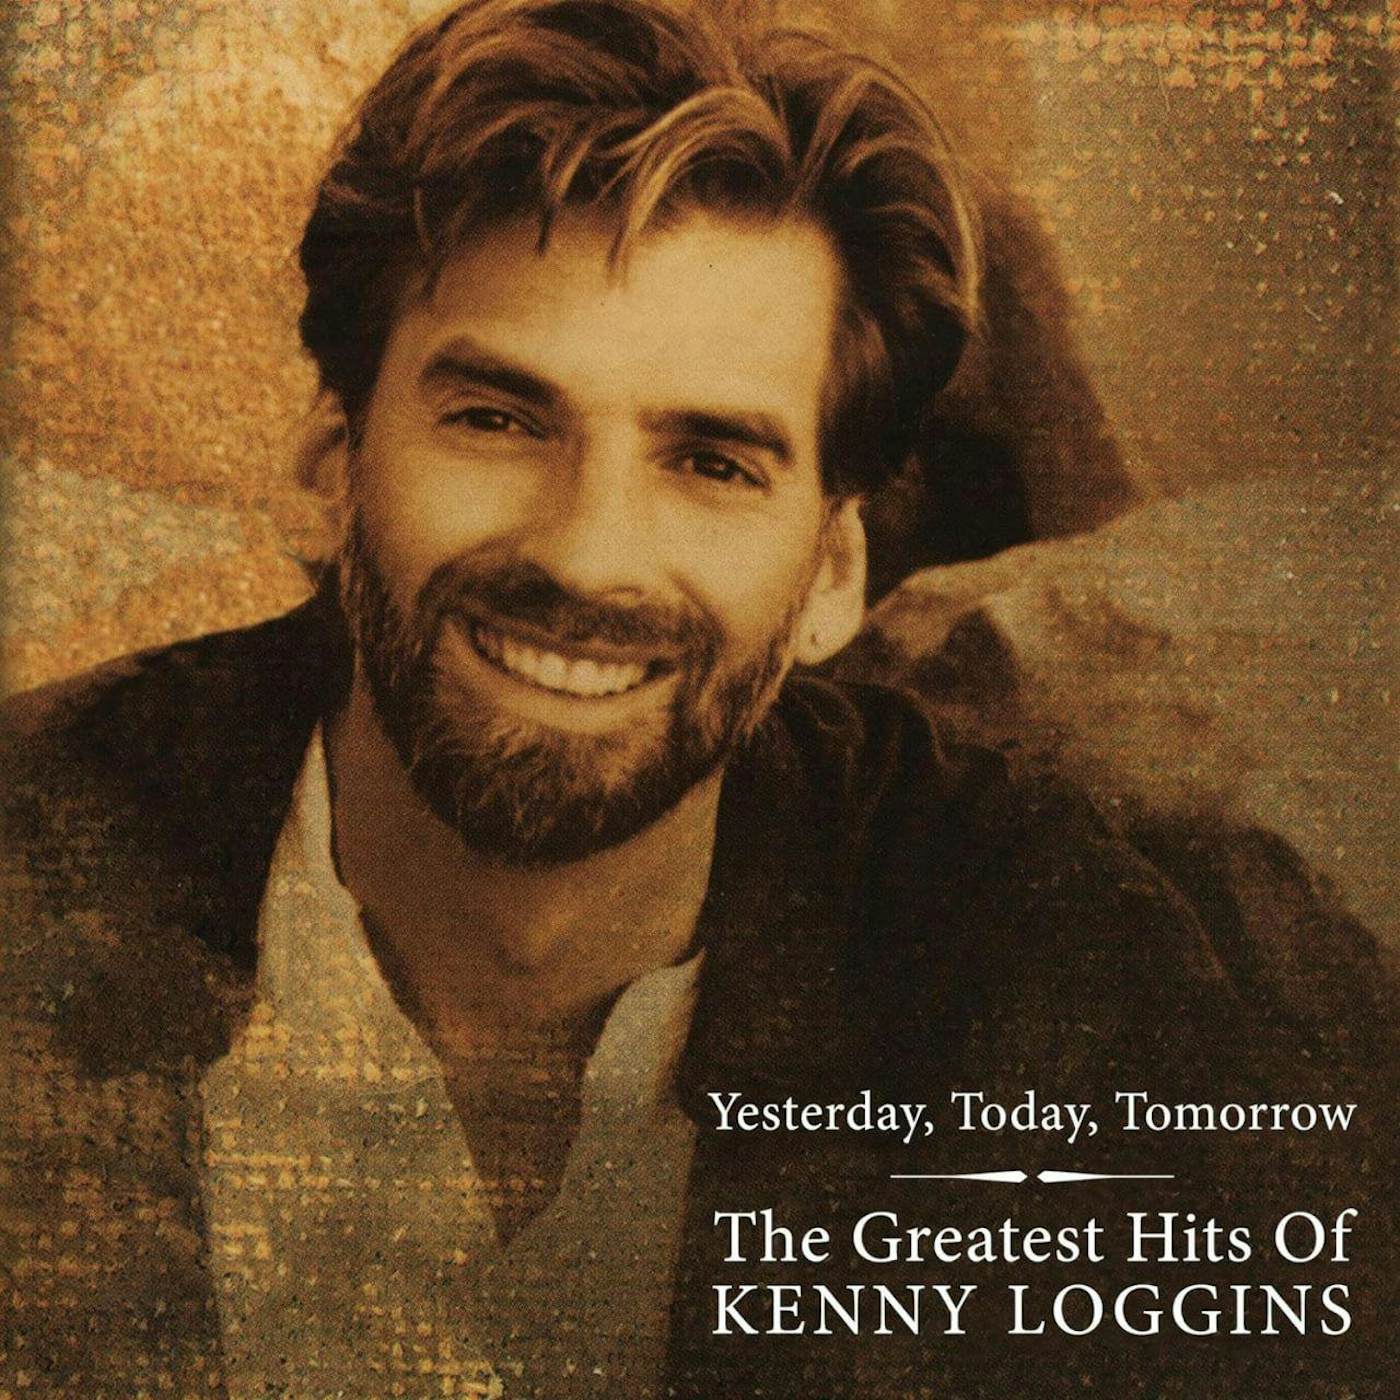 The Greatest Hits Of Kenny Loggins - Yesterday Today Tomorrow (2LP/180g/Clear Gold) Vinyl Record